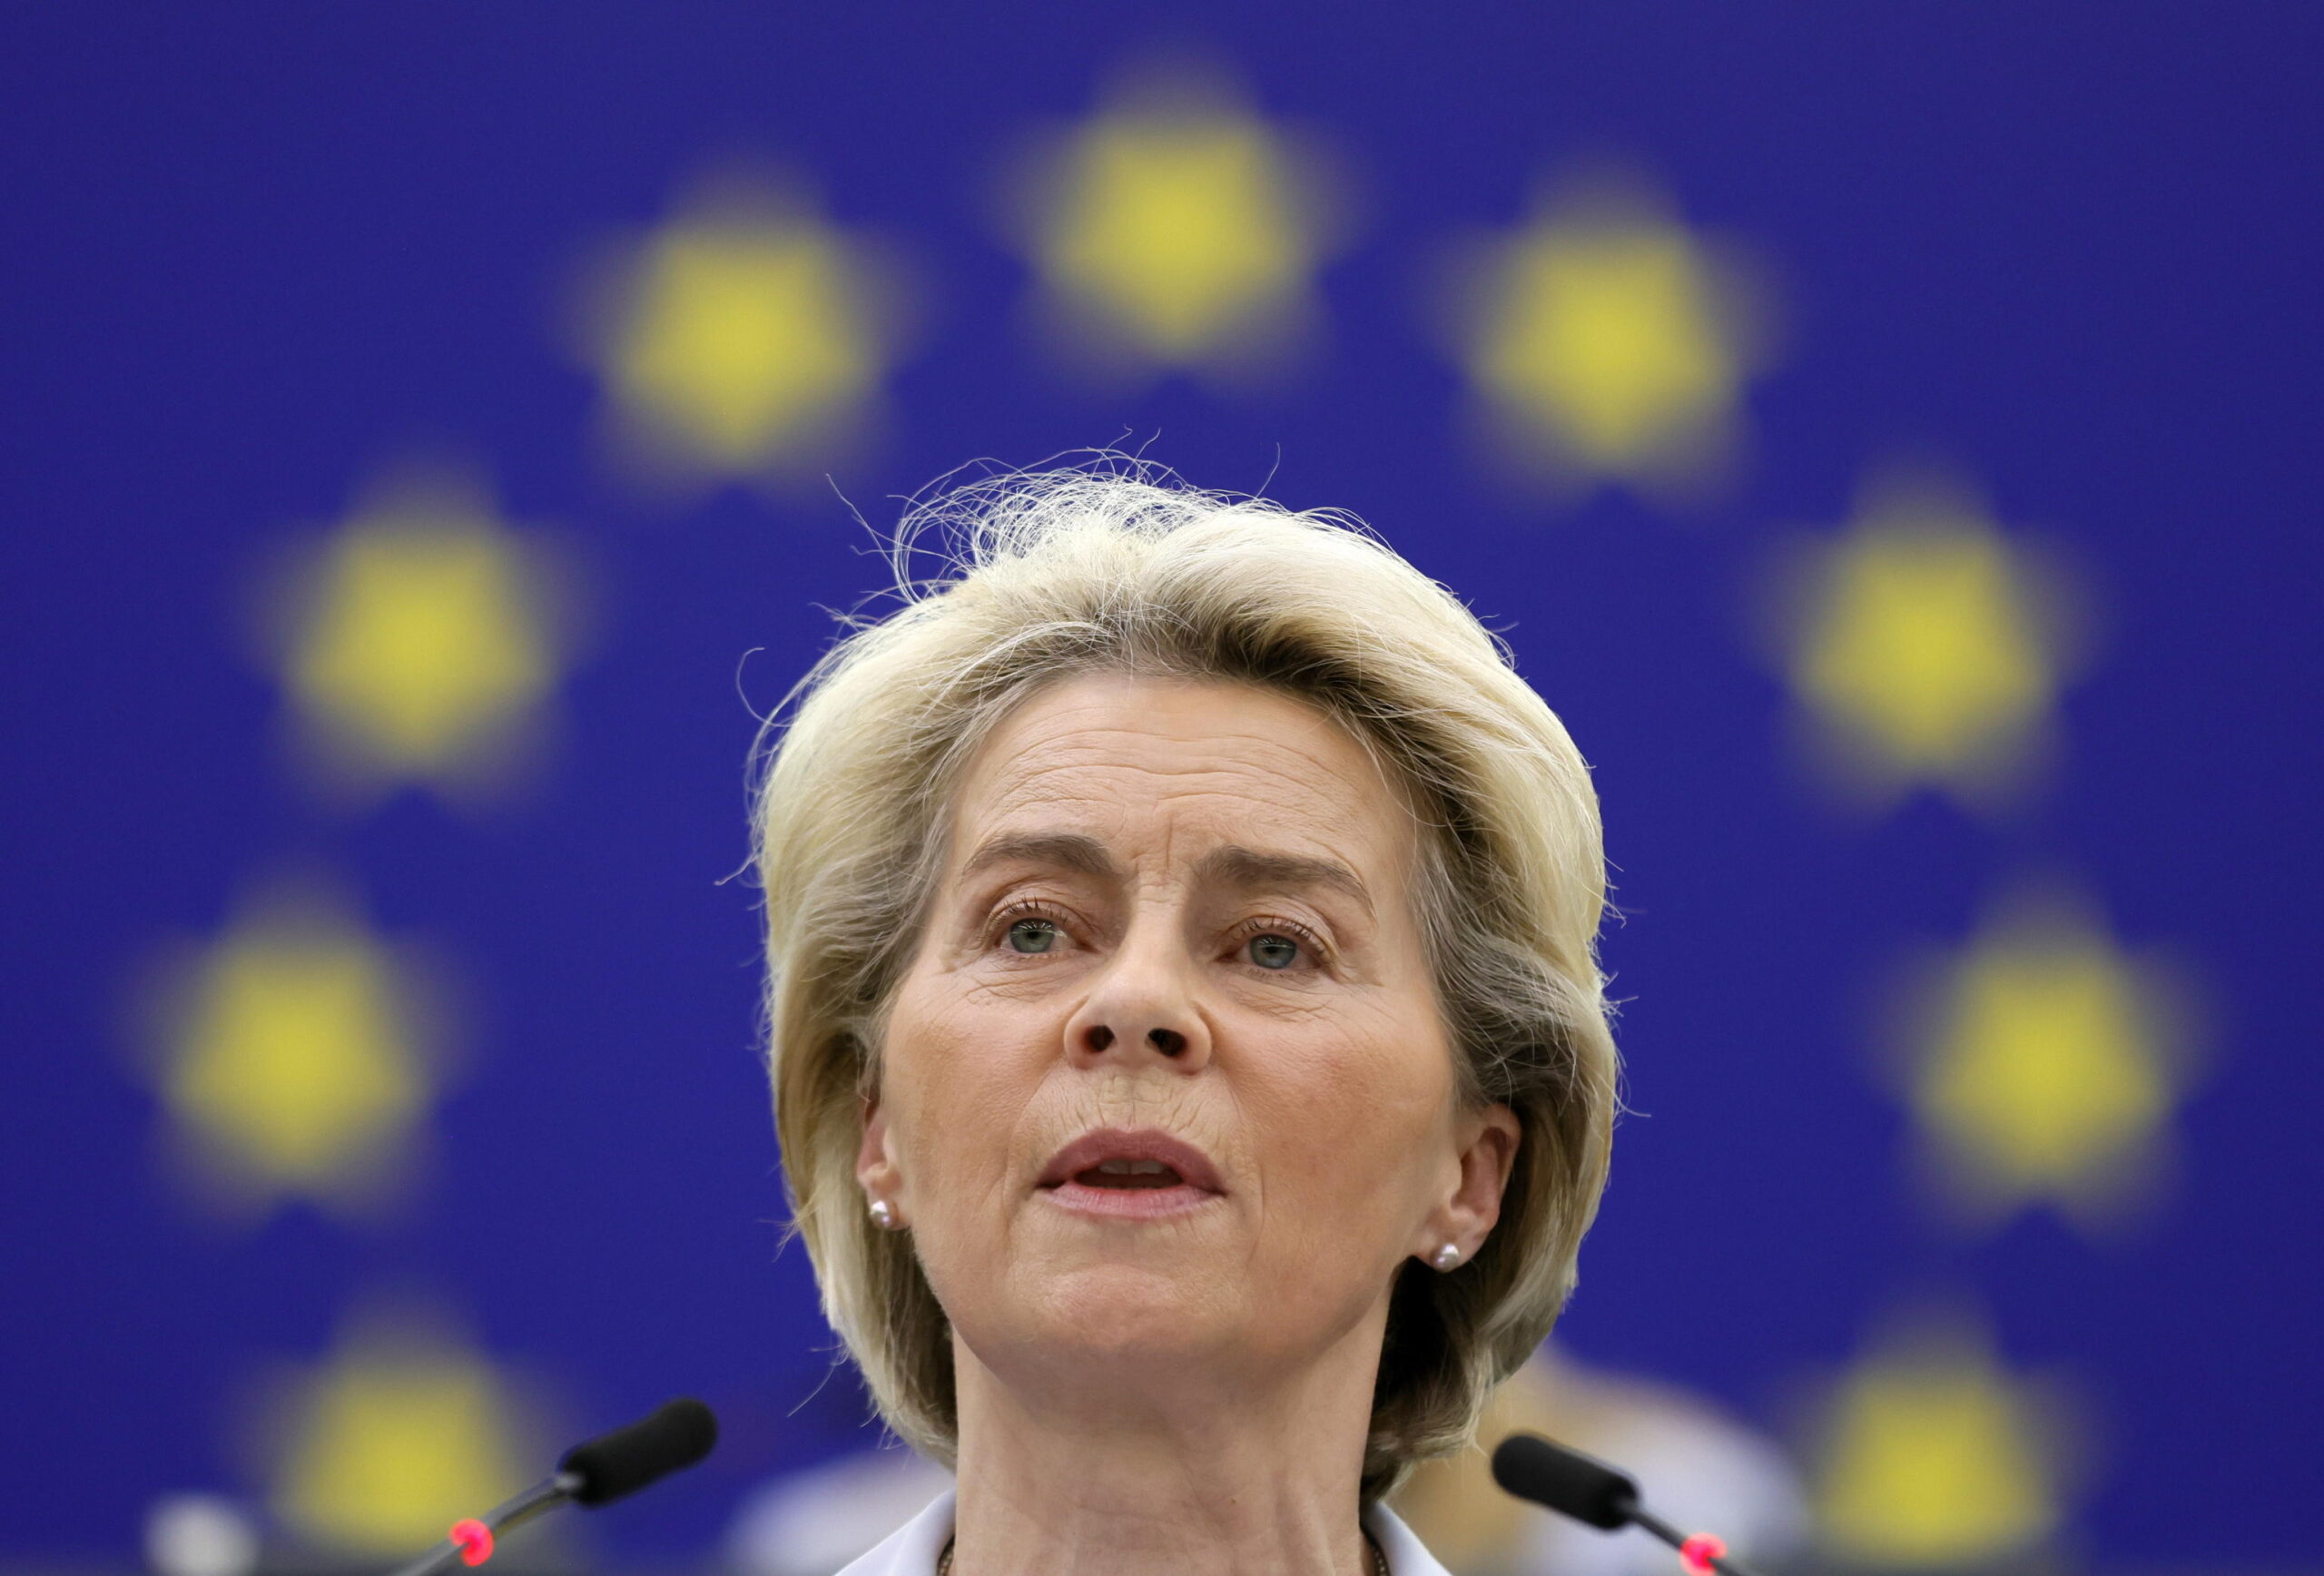 epa09873216 European Commission President Ursula von der Leyen delivers a speech during a debate at the European Parliament in Strasbourg, France, 06 April 2022. The European Parliament on 06 April will review the results of the European Council held on 24 and 25 March, focusing on the latest developments of the war in Ukraine and the EU sanctions against Russia.  EPA/RONALD WITTEK